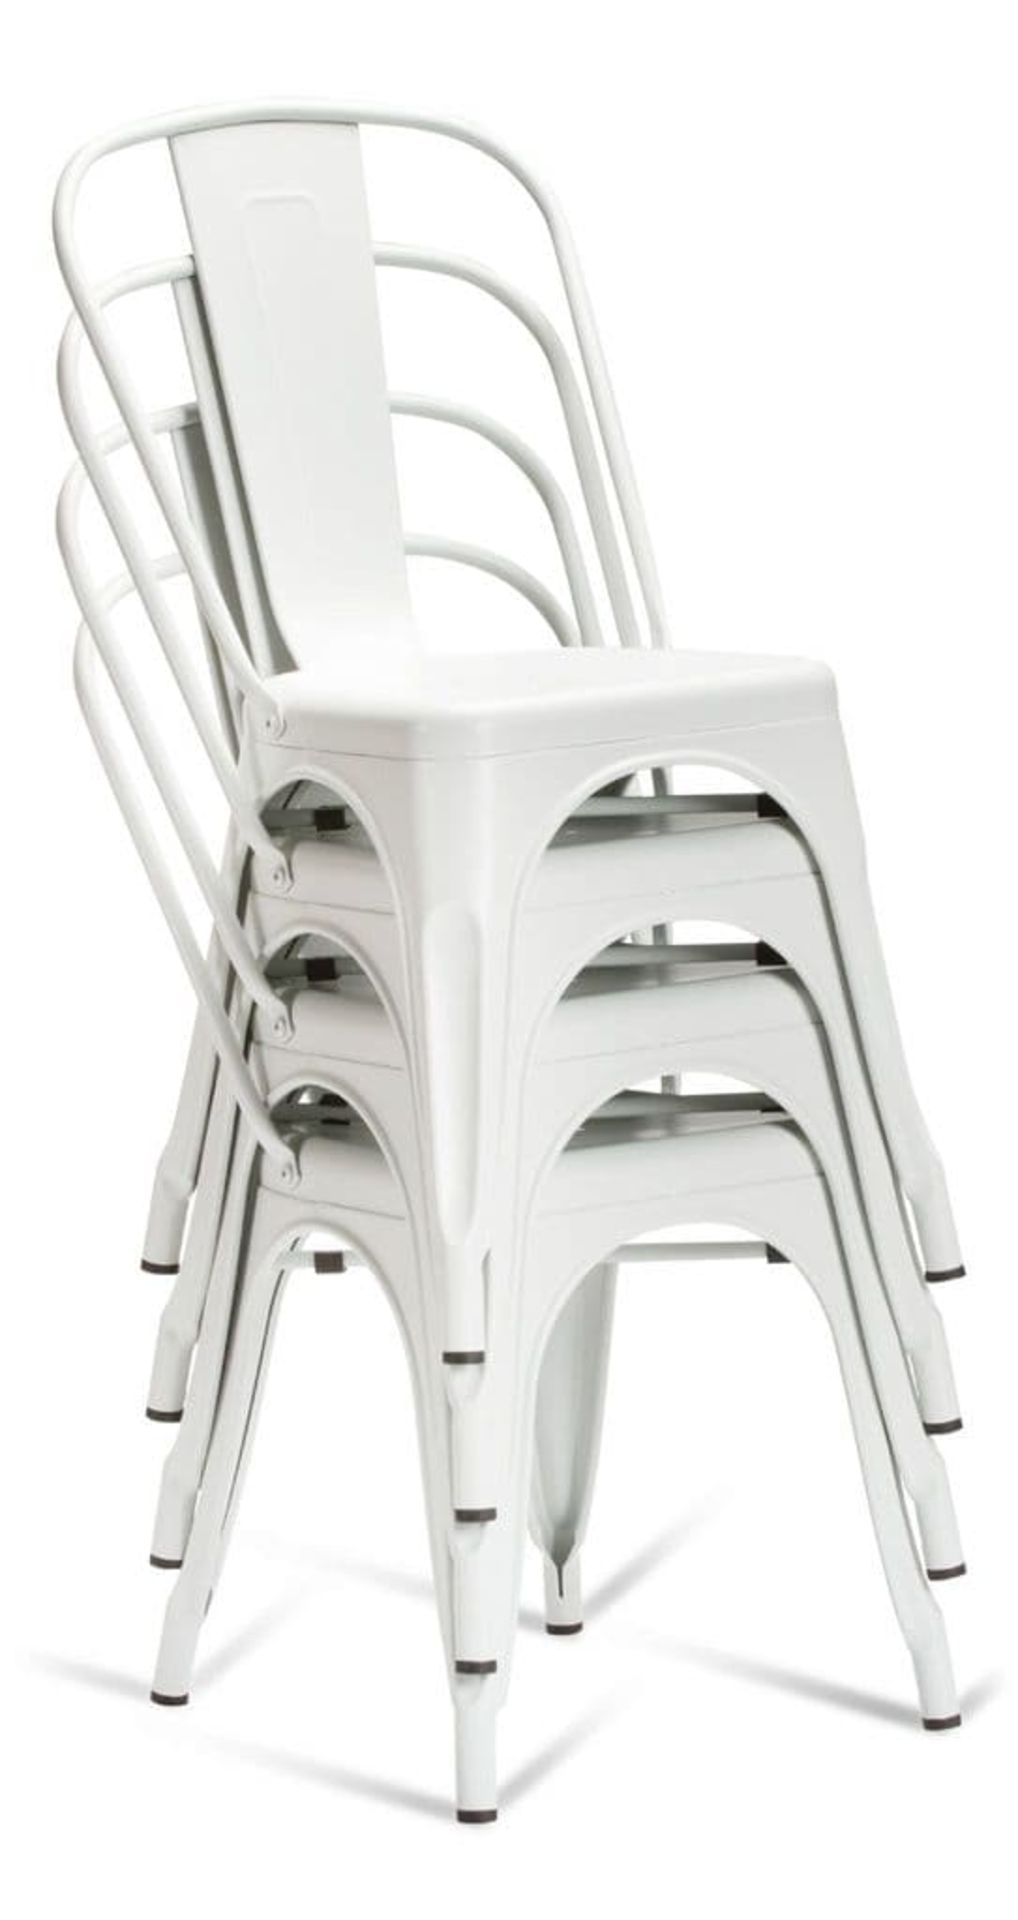 1 x Tolix Industrial Style Outdoor Bistro Table and Chair Set in White- Includes 1 x Table and 4 x - Image 9 of 14